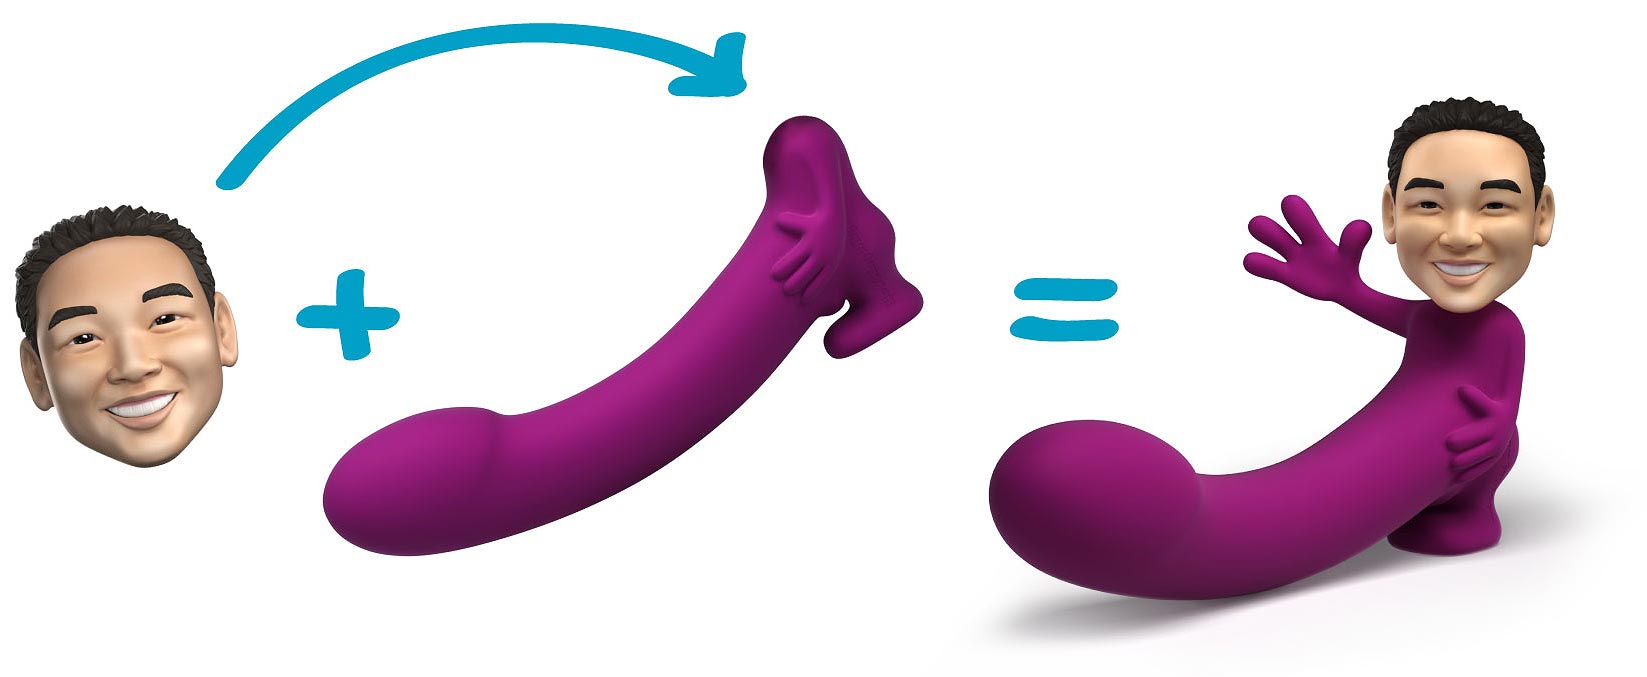 You can get a model of your partner's face at the end of your dildo